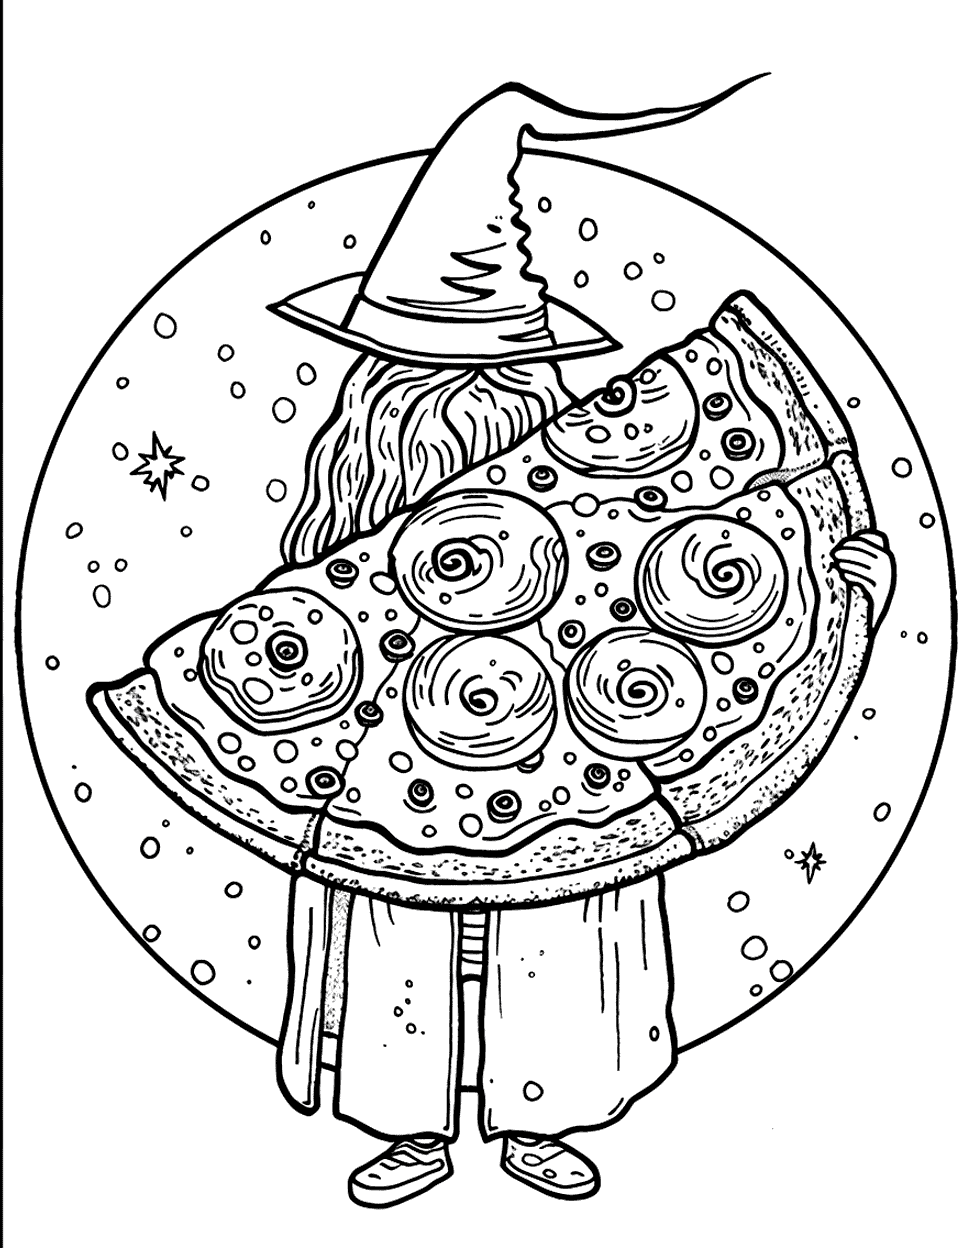 Magic Pizza Wizard Coloring Page - A wizard holding a huge pizza slice made with magic spell.